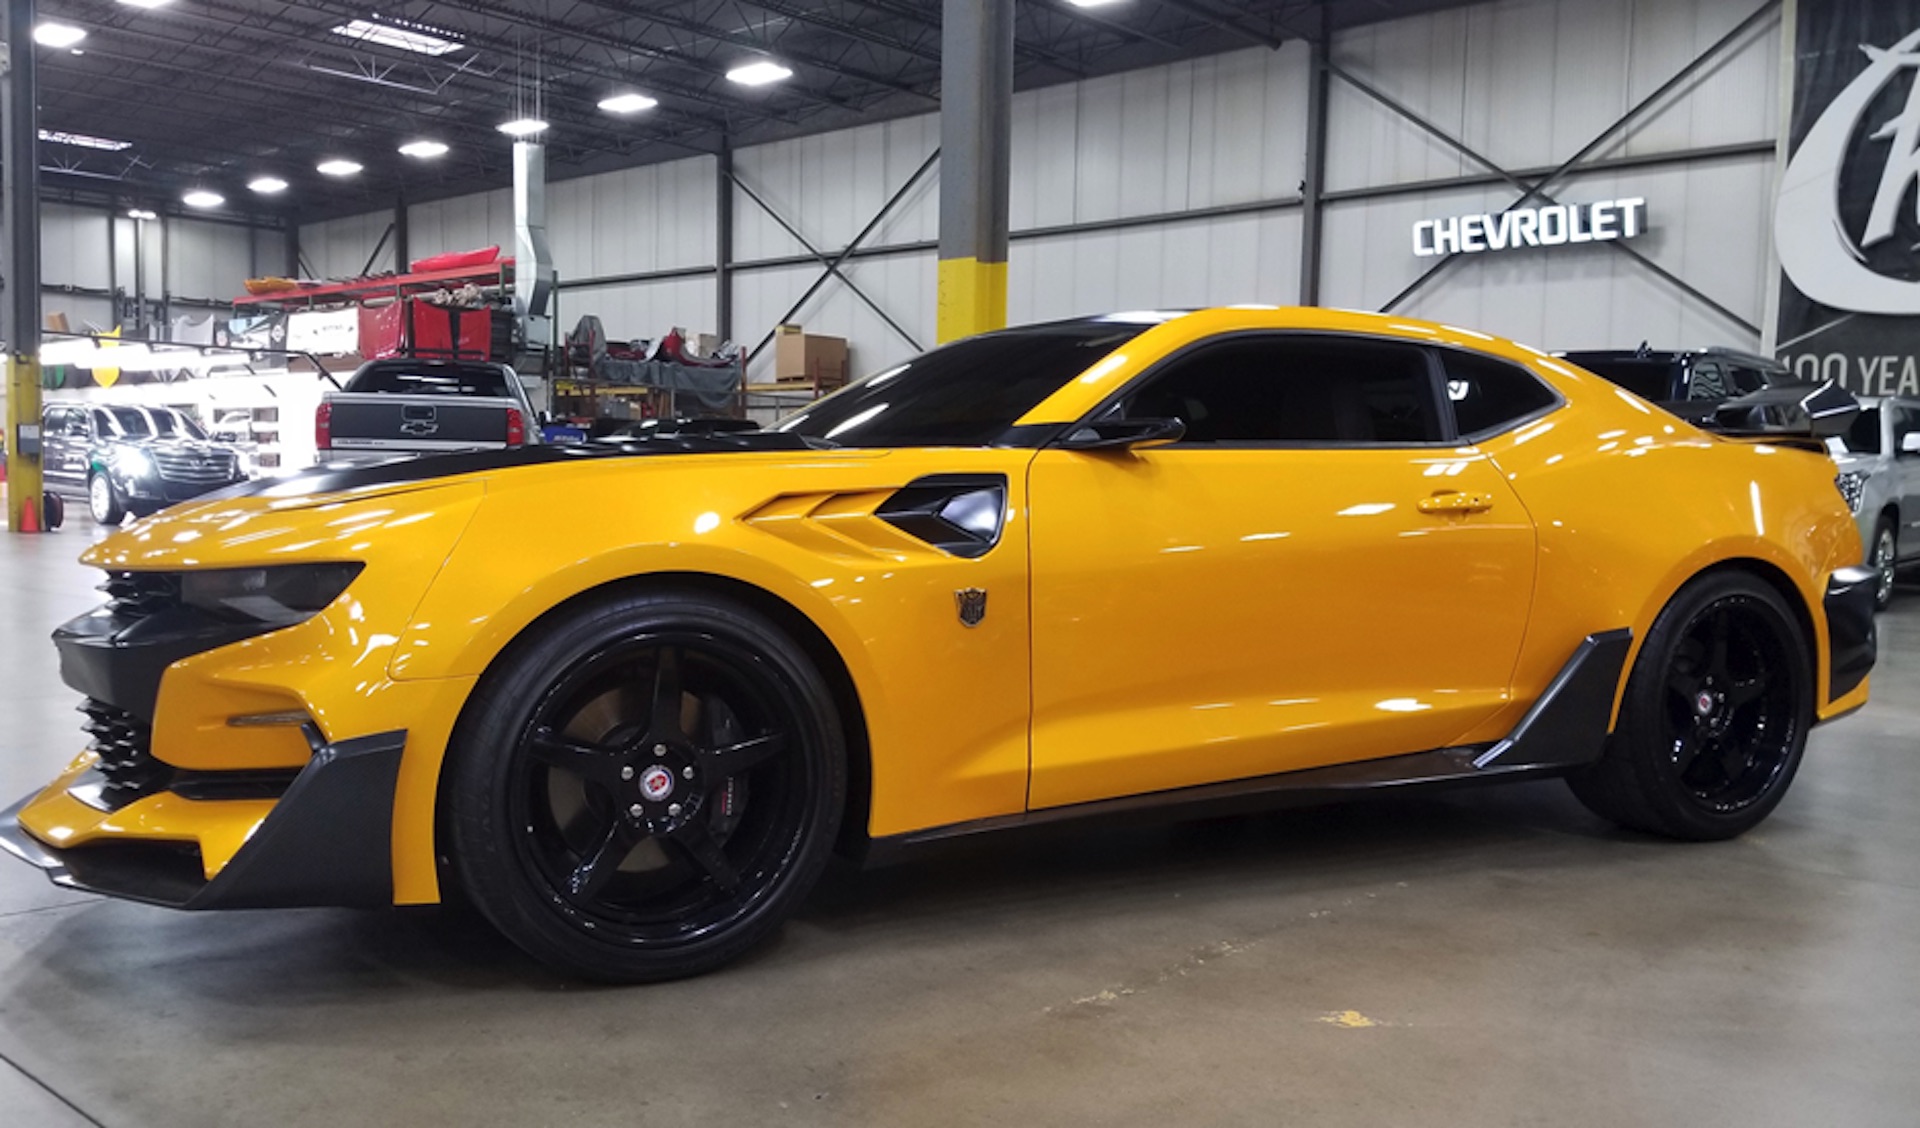 All 4 Bumblebee Camaros from Transformers films fetch 500,000 in group